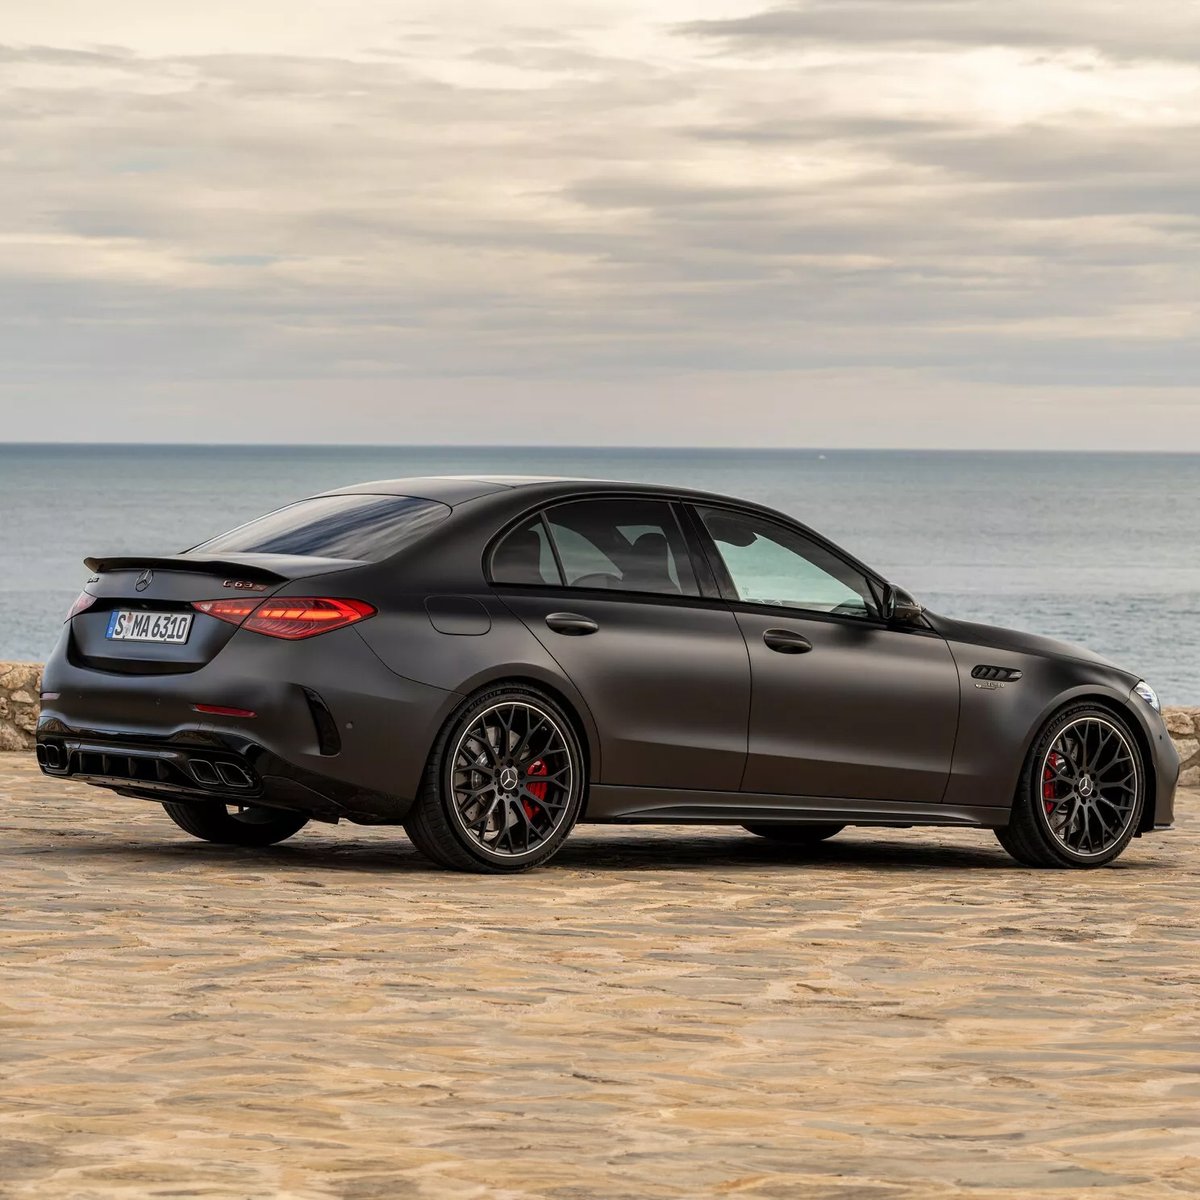 The Mercedes-AMG C63 S E Performance costs $3,855 more than the BMW M3 Competition in the USA which suggests the local price will be around R2,15m.

Do you think that is an accurate assessment or will the controversial AMG surprise us when the price is announced?